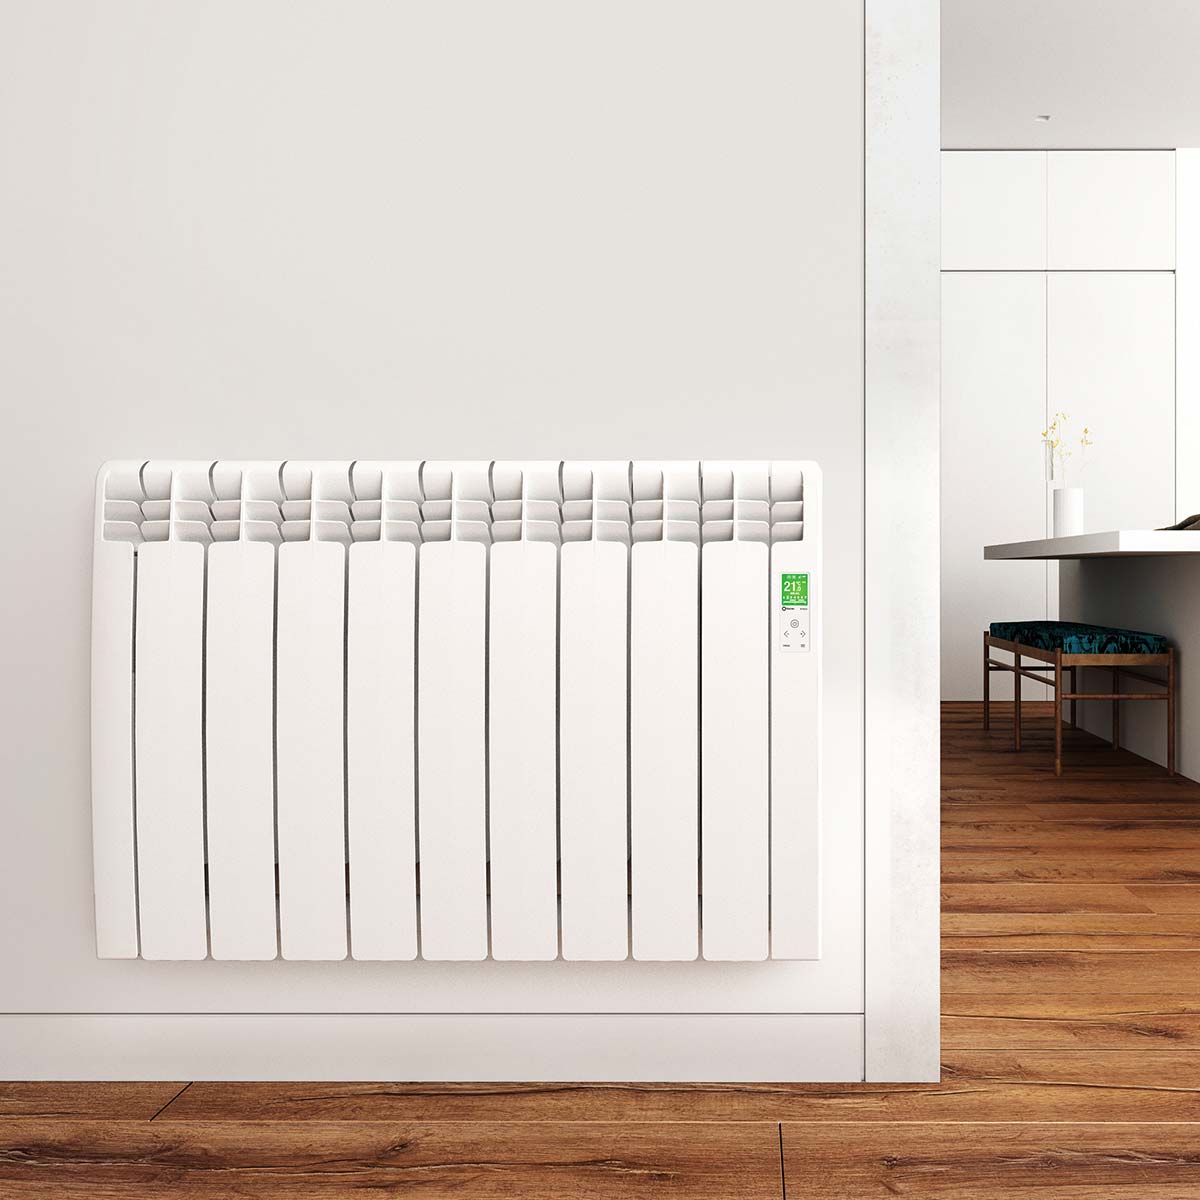 Rointe D Series radiator aluminium oil filled with wifi capability in white